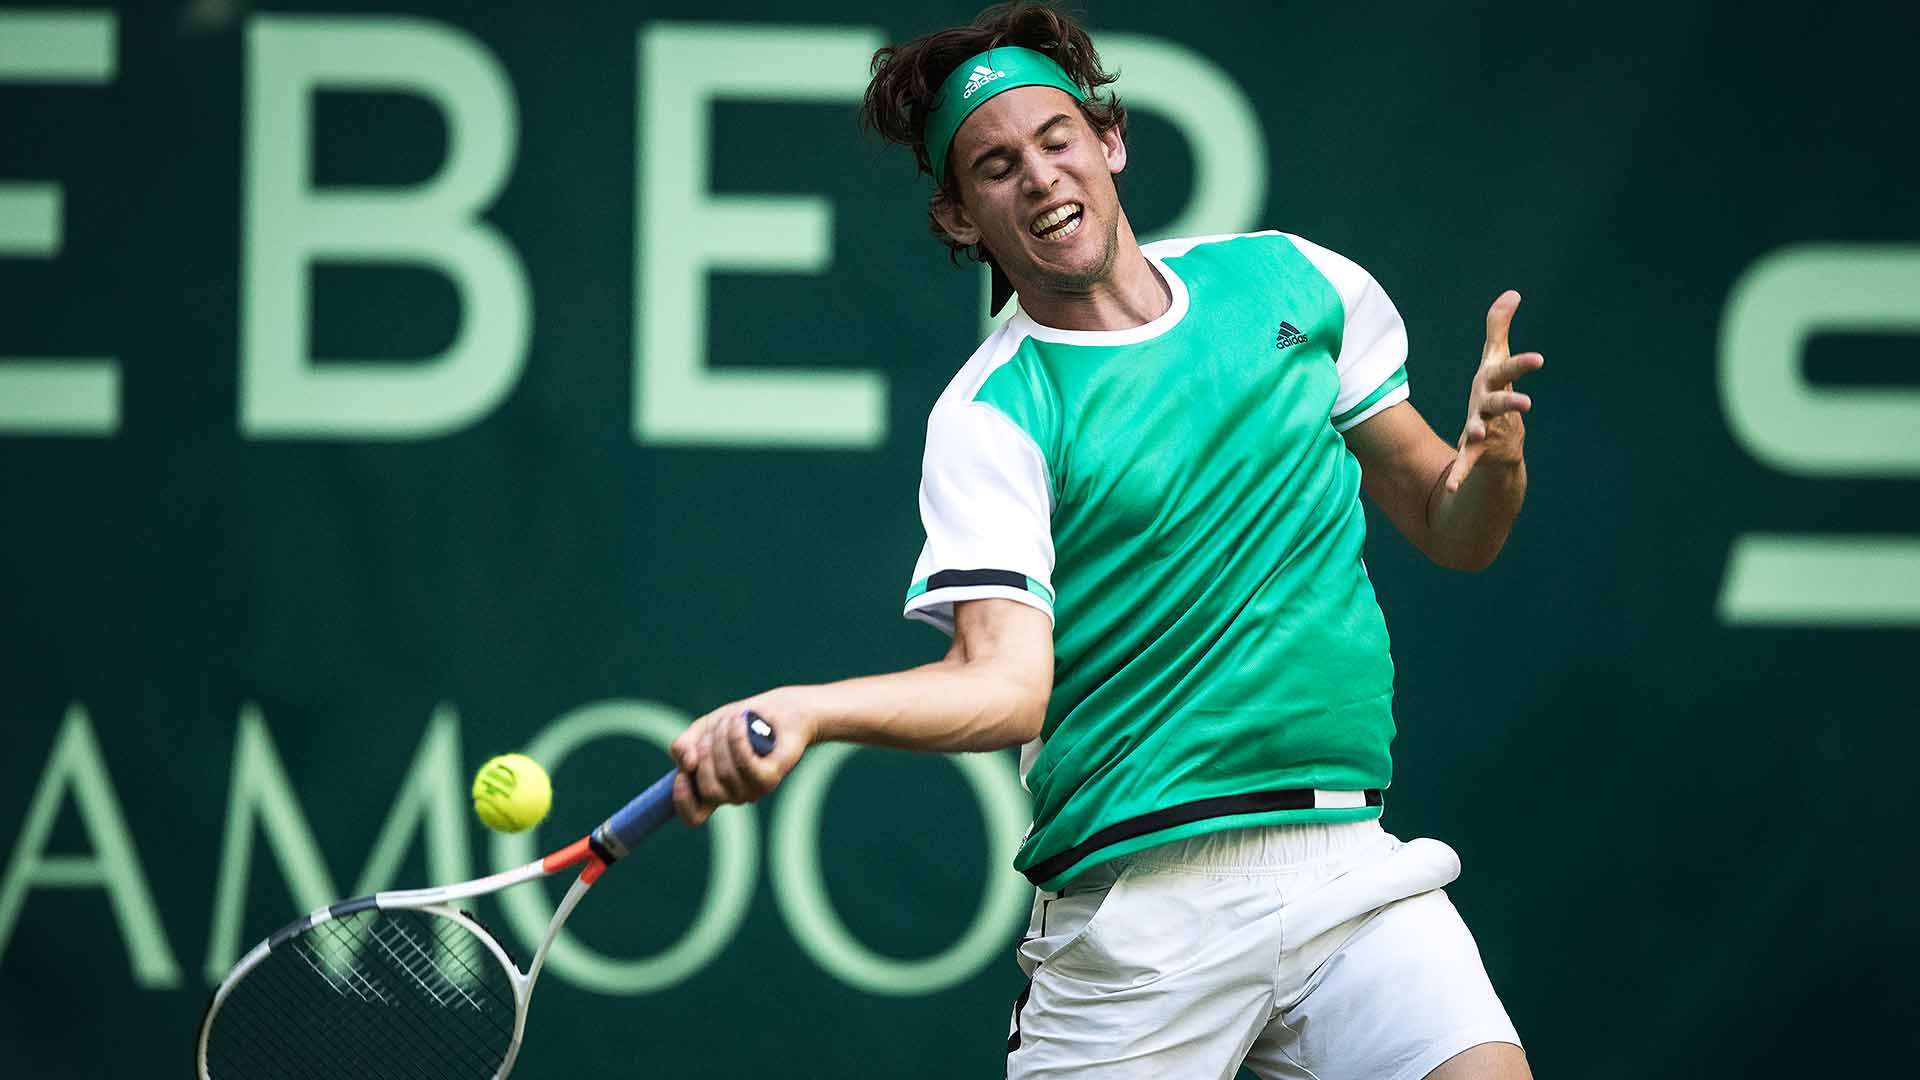 Dominic Thiem Wins His Grass-Court Opener At The Gerry Weber Open In Halle  | ATP Tour | Tennis